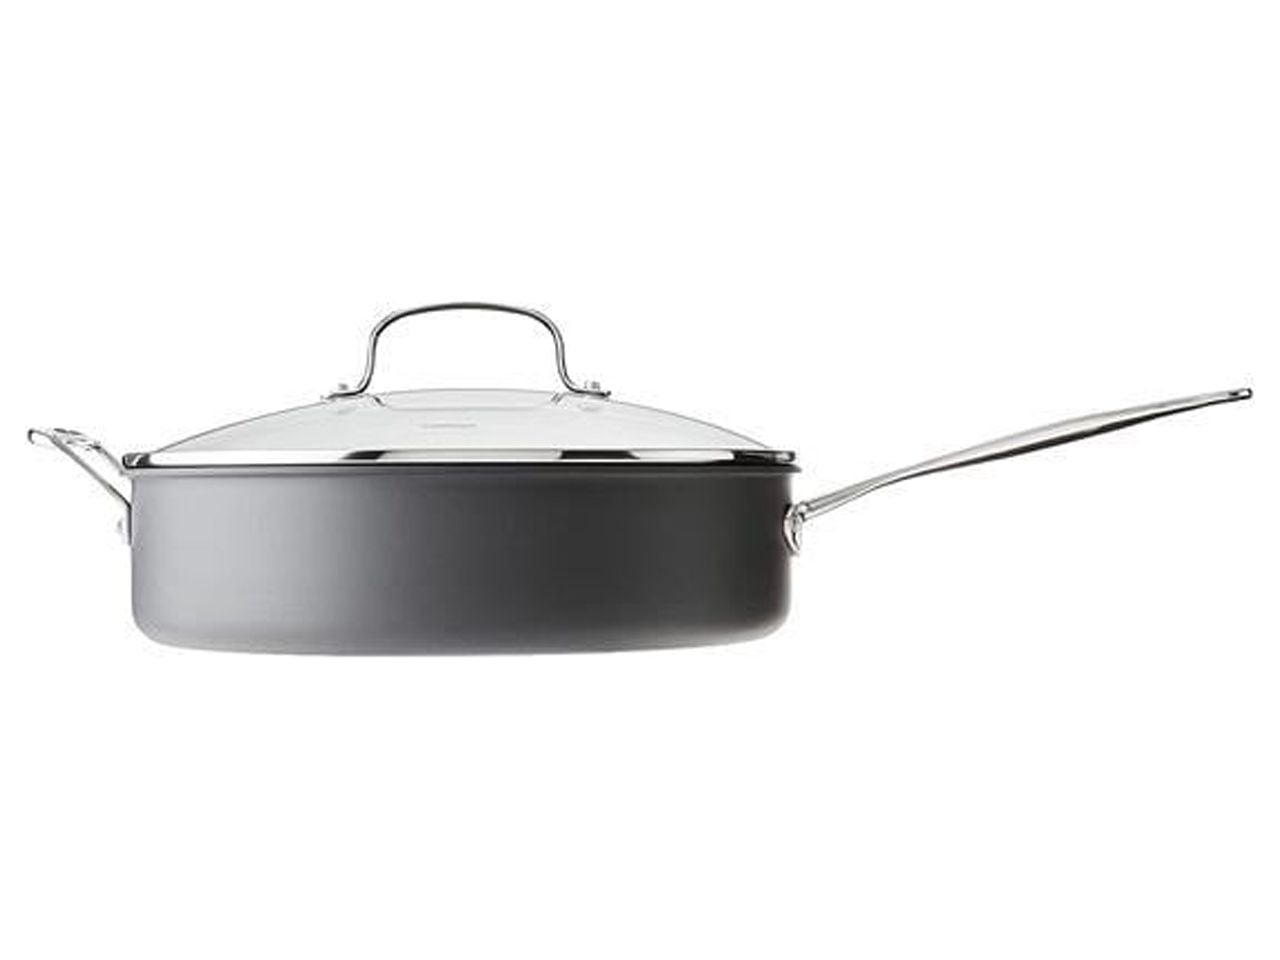 Cuisinart FCT33-28H French Classic Tri-Ply Stainless 5-1/2-Quart Saute Pan  with Helper Handle and Cover - On Sale - Bed Bath & Beyond - 22412804